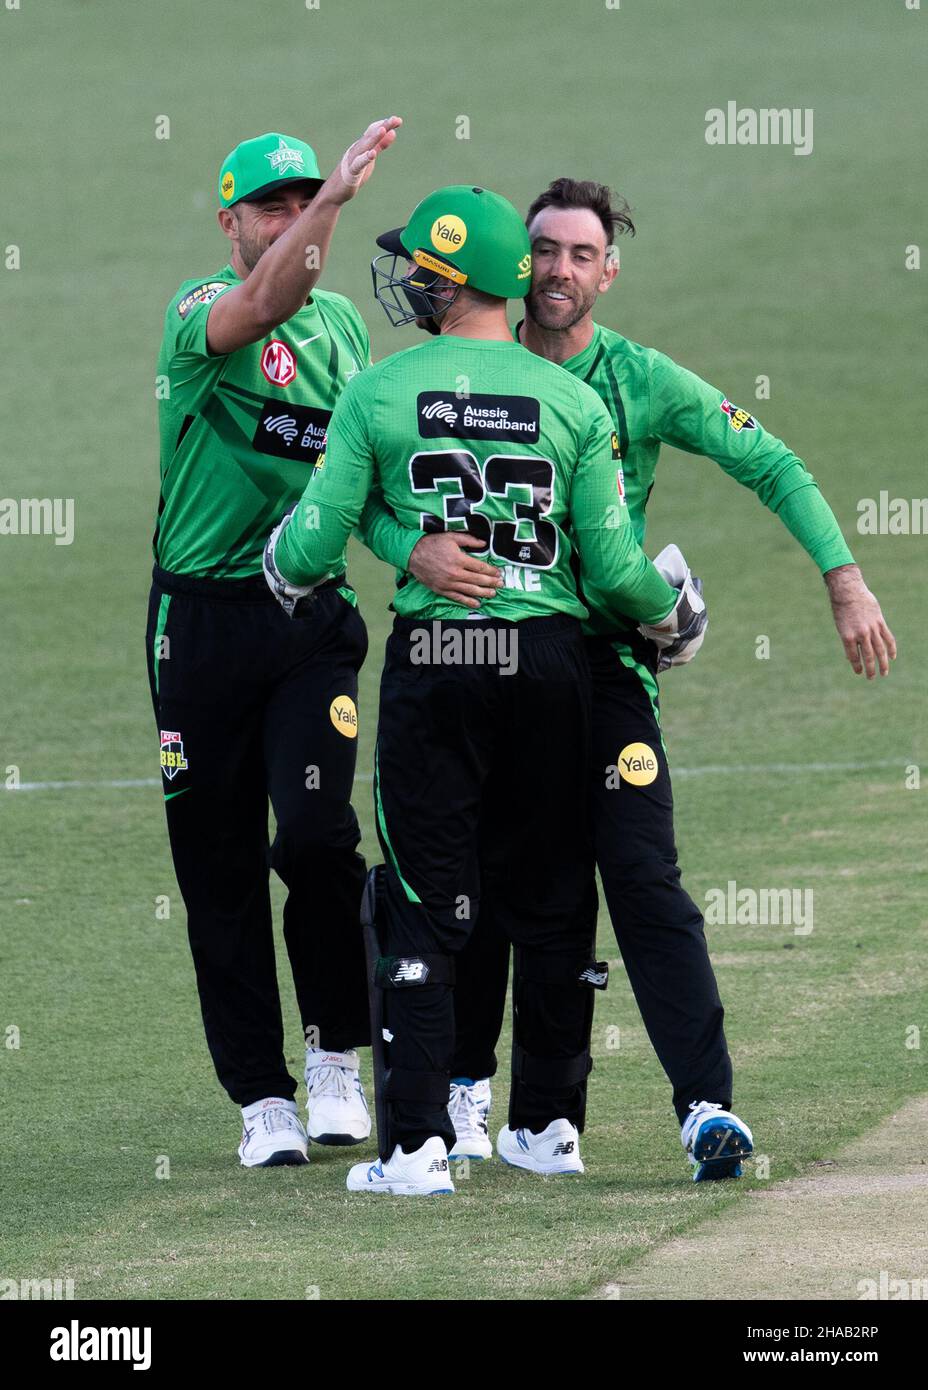 Sydney, Australia. 12th Dec, 2021. Glen Maxwell of Stars celebrate after taking the wicket of Sam Whiteman of Thunders during the match between Sydney Thunder and Melbourne Stars at Sydney Showground Stadium, on December 12, 2021, in Sydney, Australia. (Editorial use only) Credit: Izhar Ahmed Khan/Alamy Live News/Alamy Live News Stock Photo